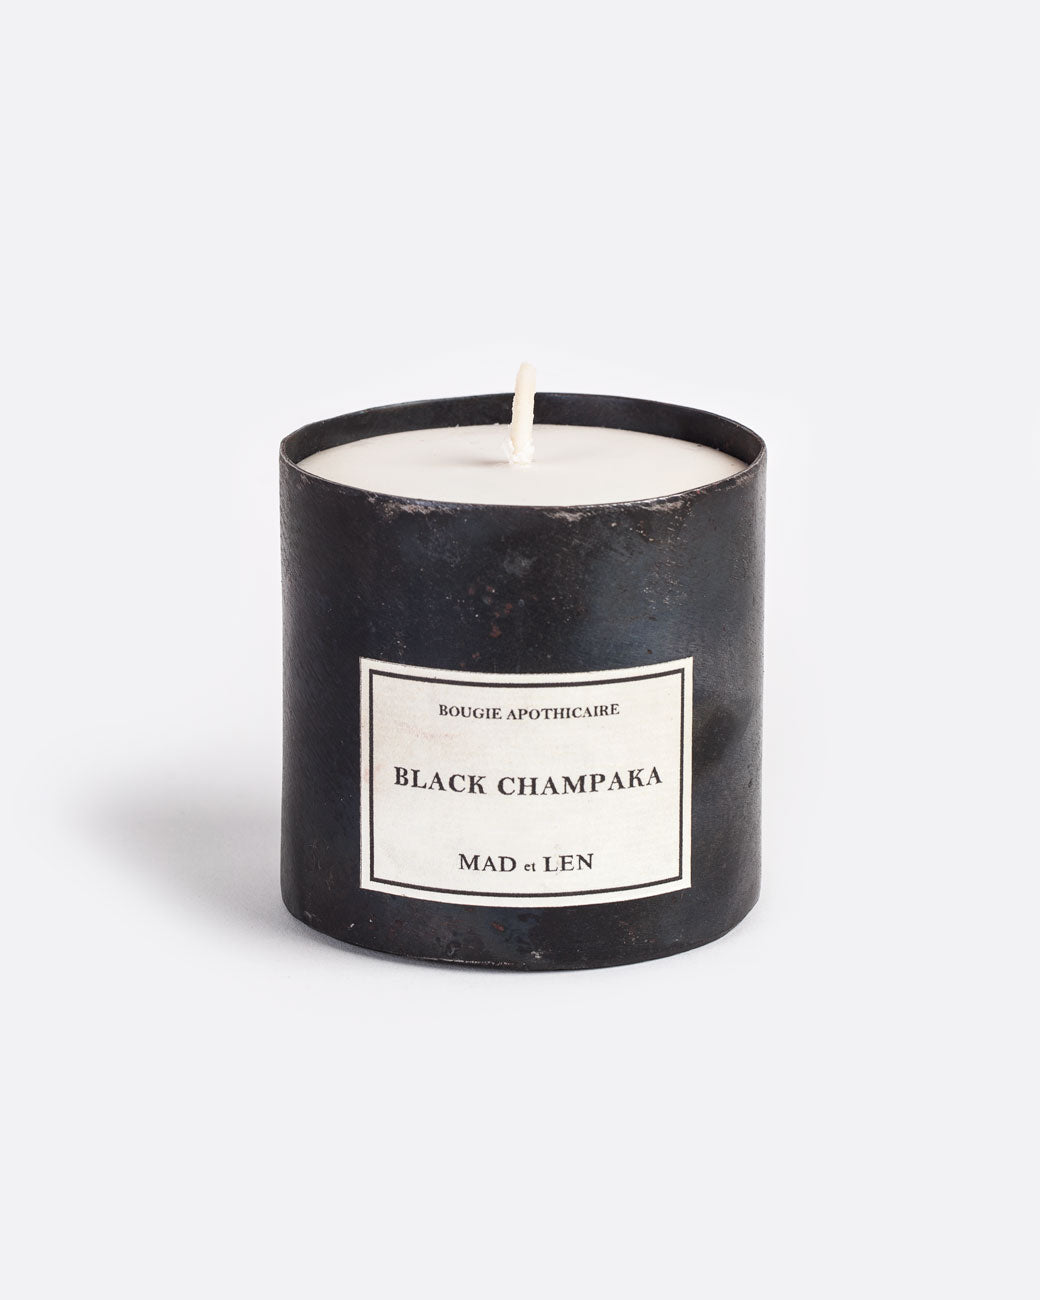 Mad et len black champaka candle measuring 3" tall and 3.25" wide. housed in a one-of-a-kind blackened iron vessel.